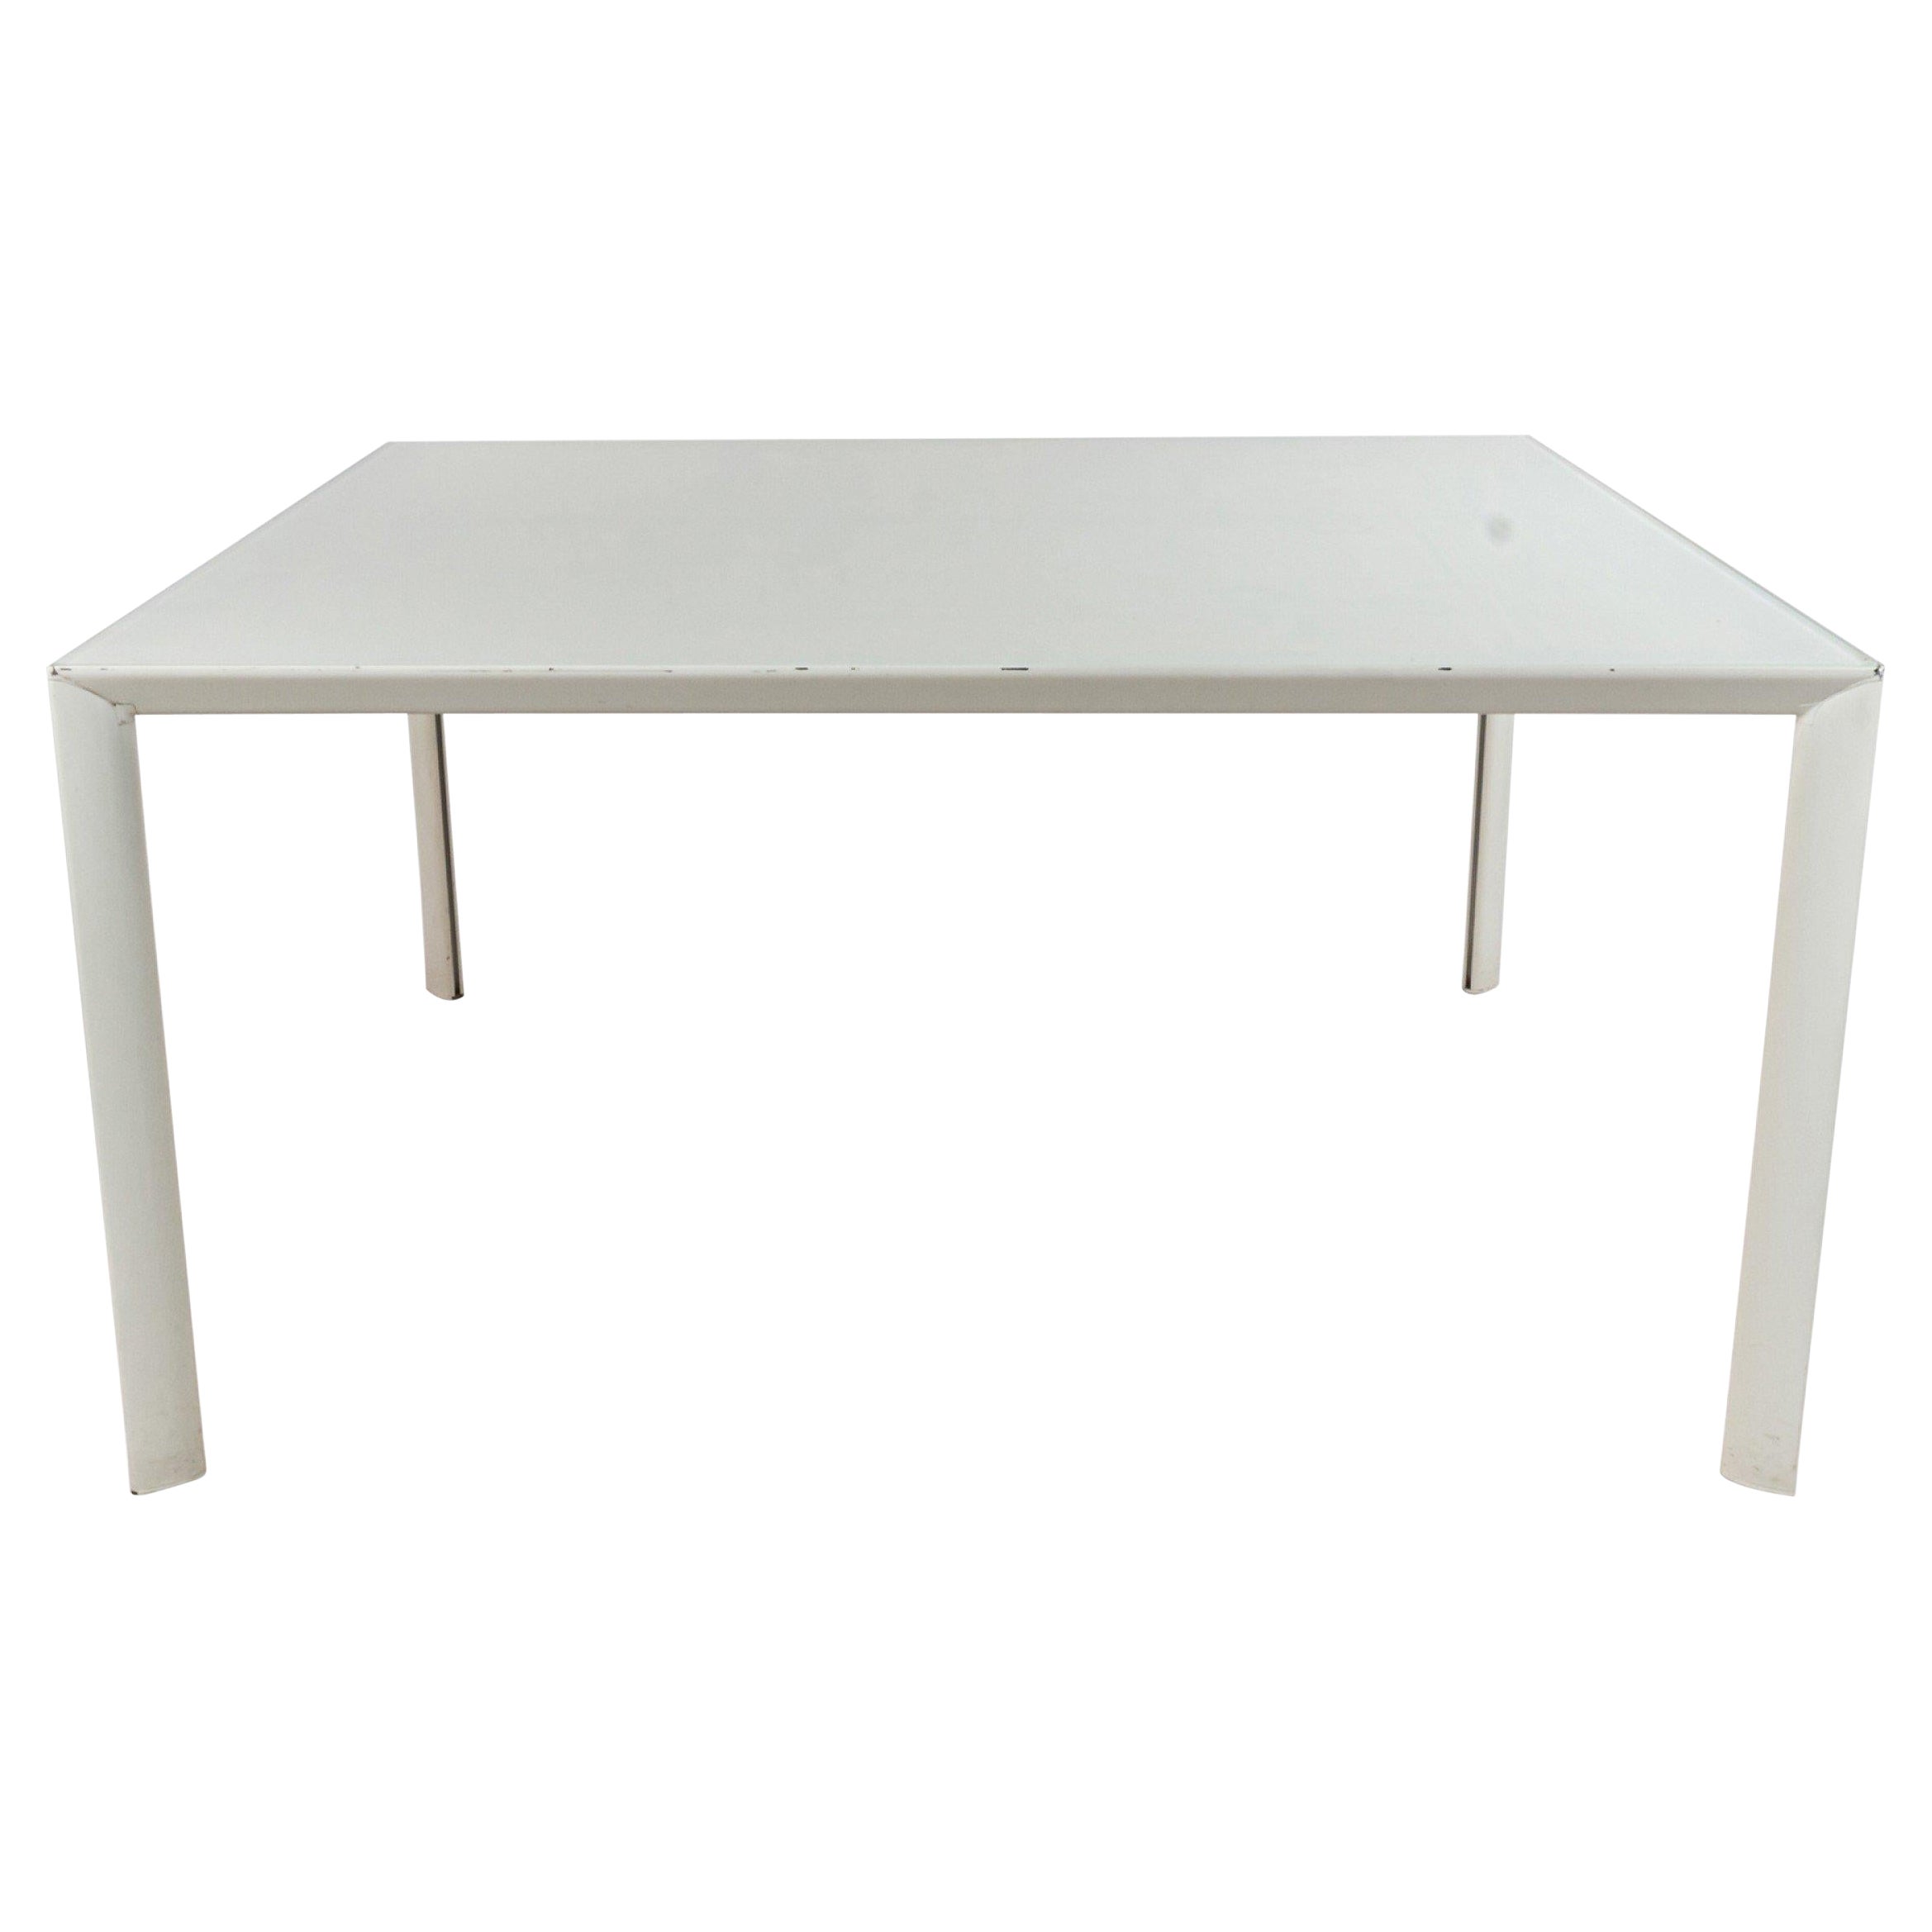 Contemporary White Metal Square Work Tables For Sale